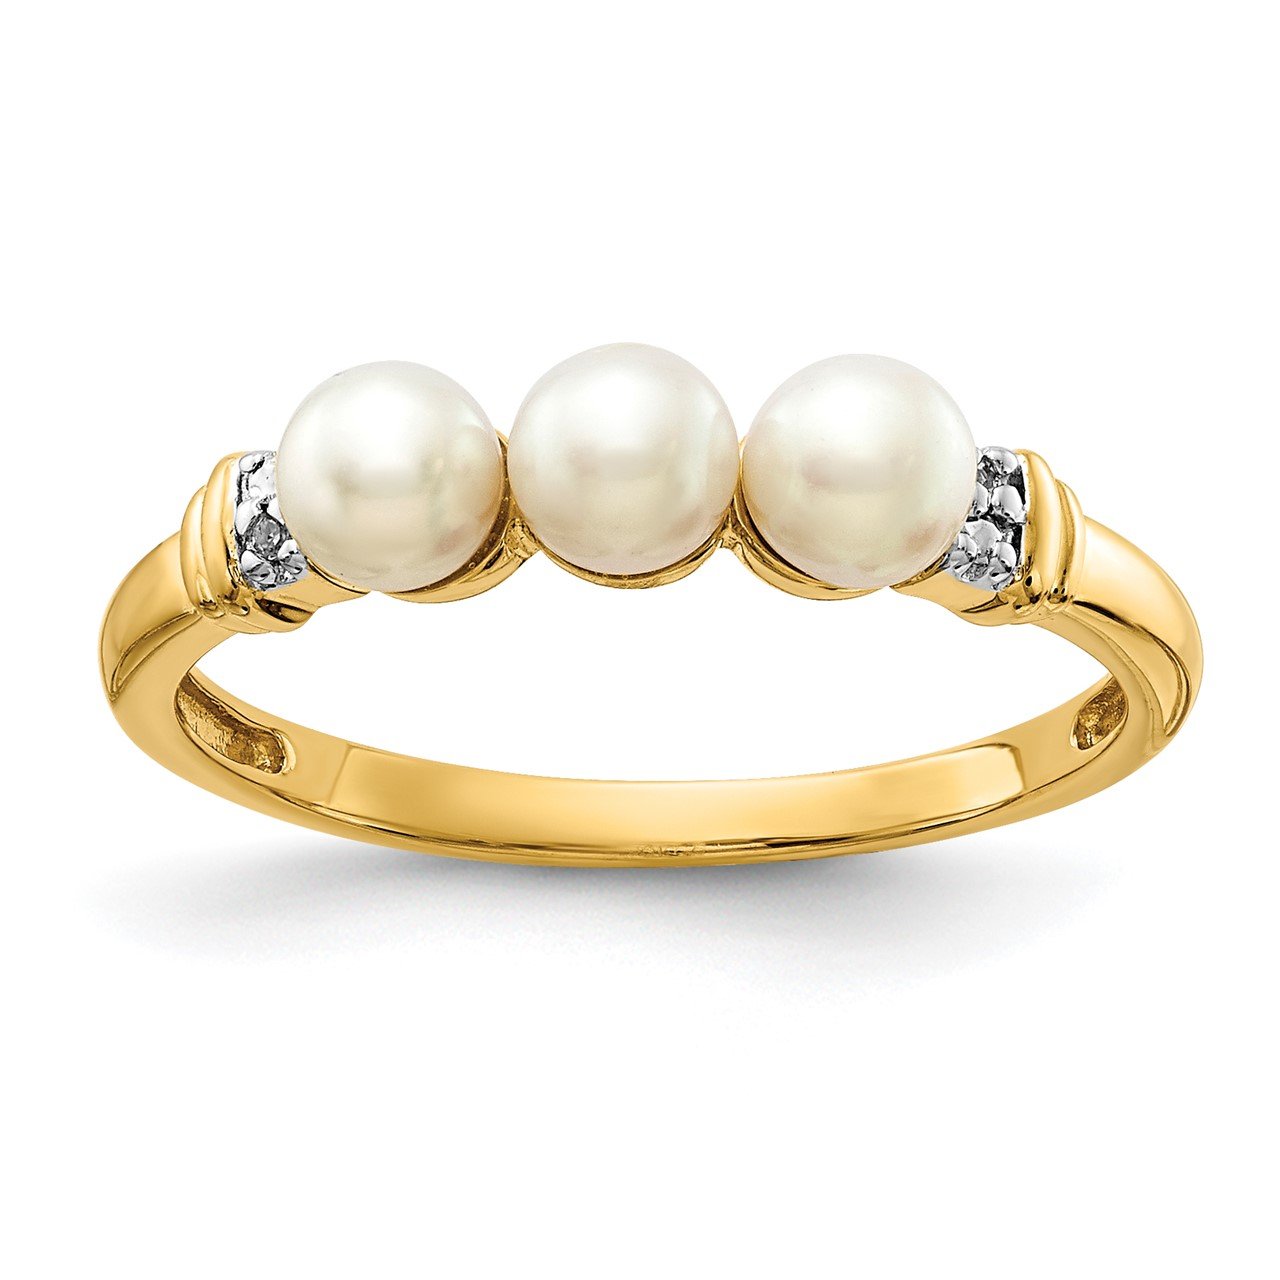 14k Diamond and FW Cultured 3-Pearl Ring